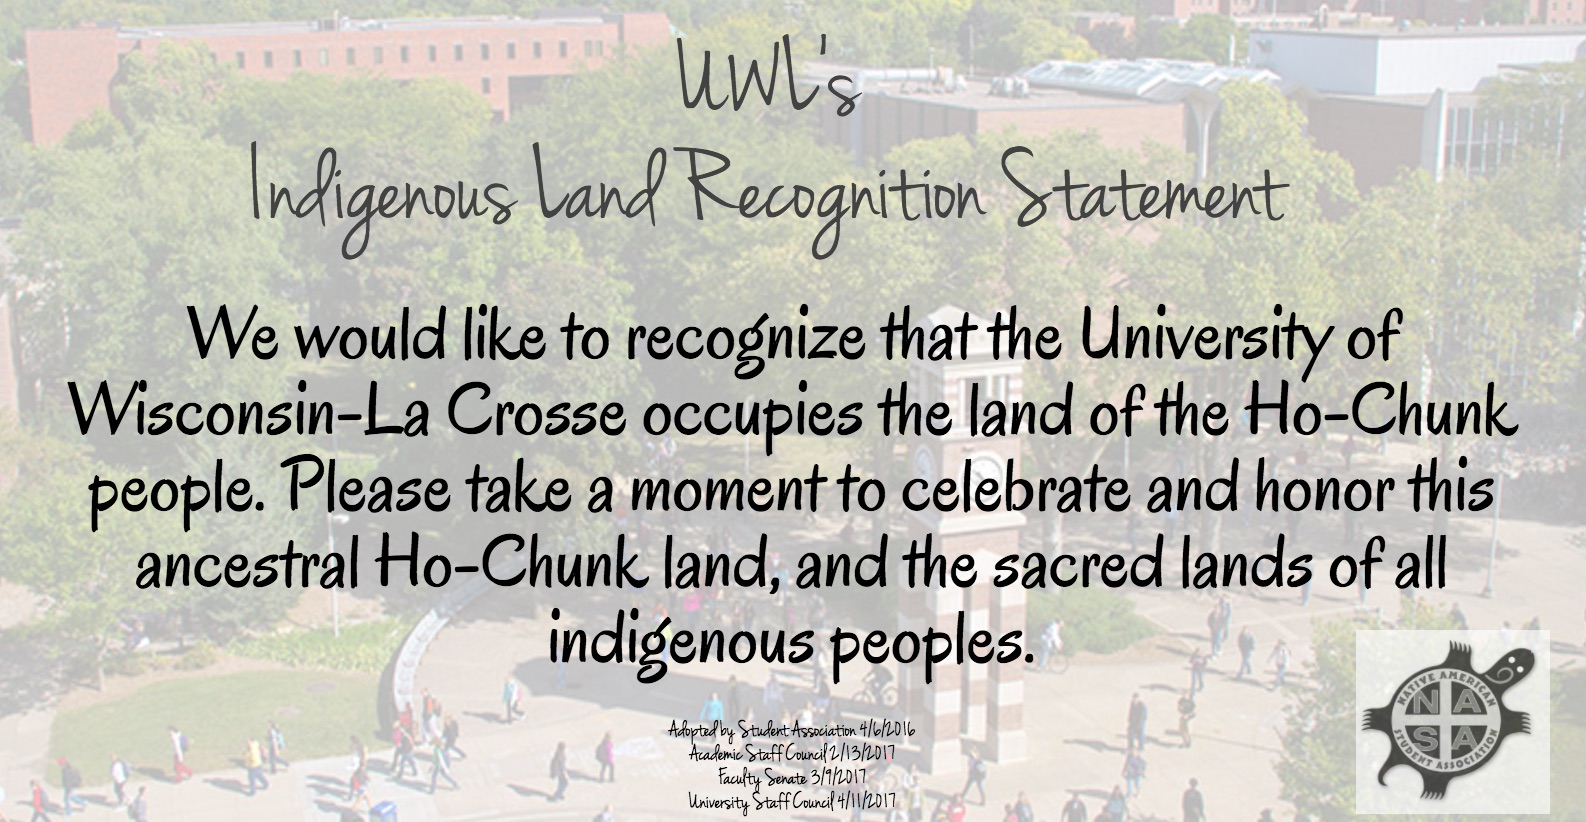 UWL Indigenous Land Recognition Statement:

We would like to recognize that the University of Wisconsin-La Crosse occupies the land of the Ho-Chunk people. Please take a moment to celebrate and honor this ancestral Ho-Chunk land, and the sacred lands of all indigenous peoples.